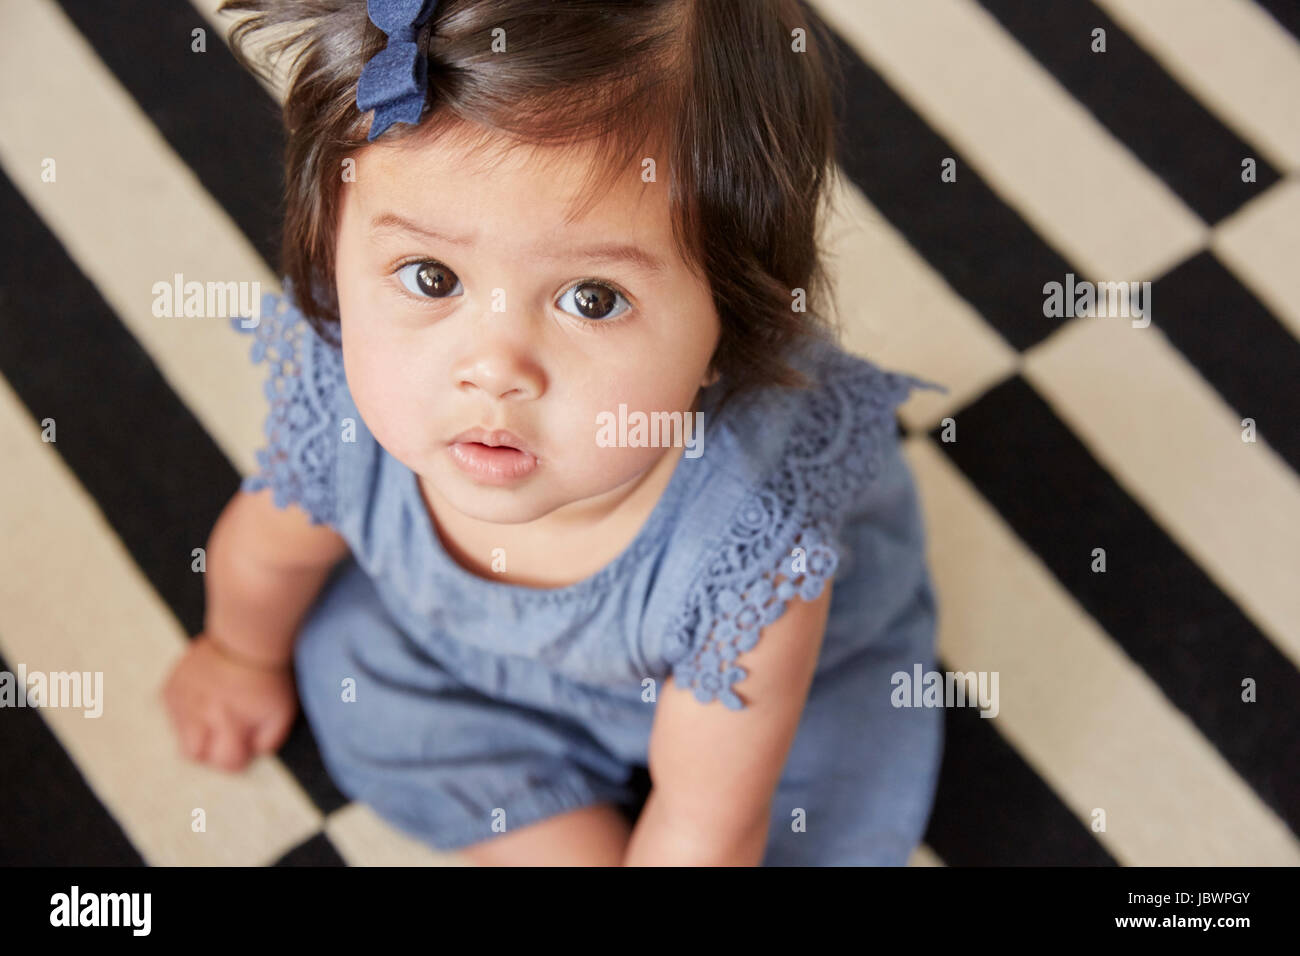 Close up overhead portrait of baby girl sitting on rug Stock Photo